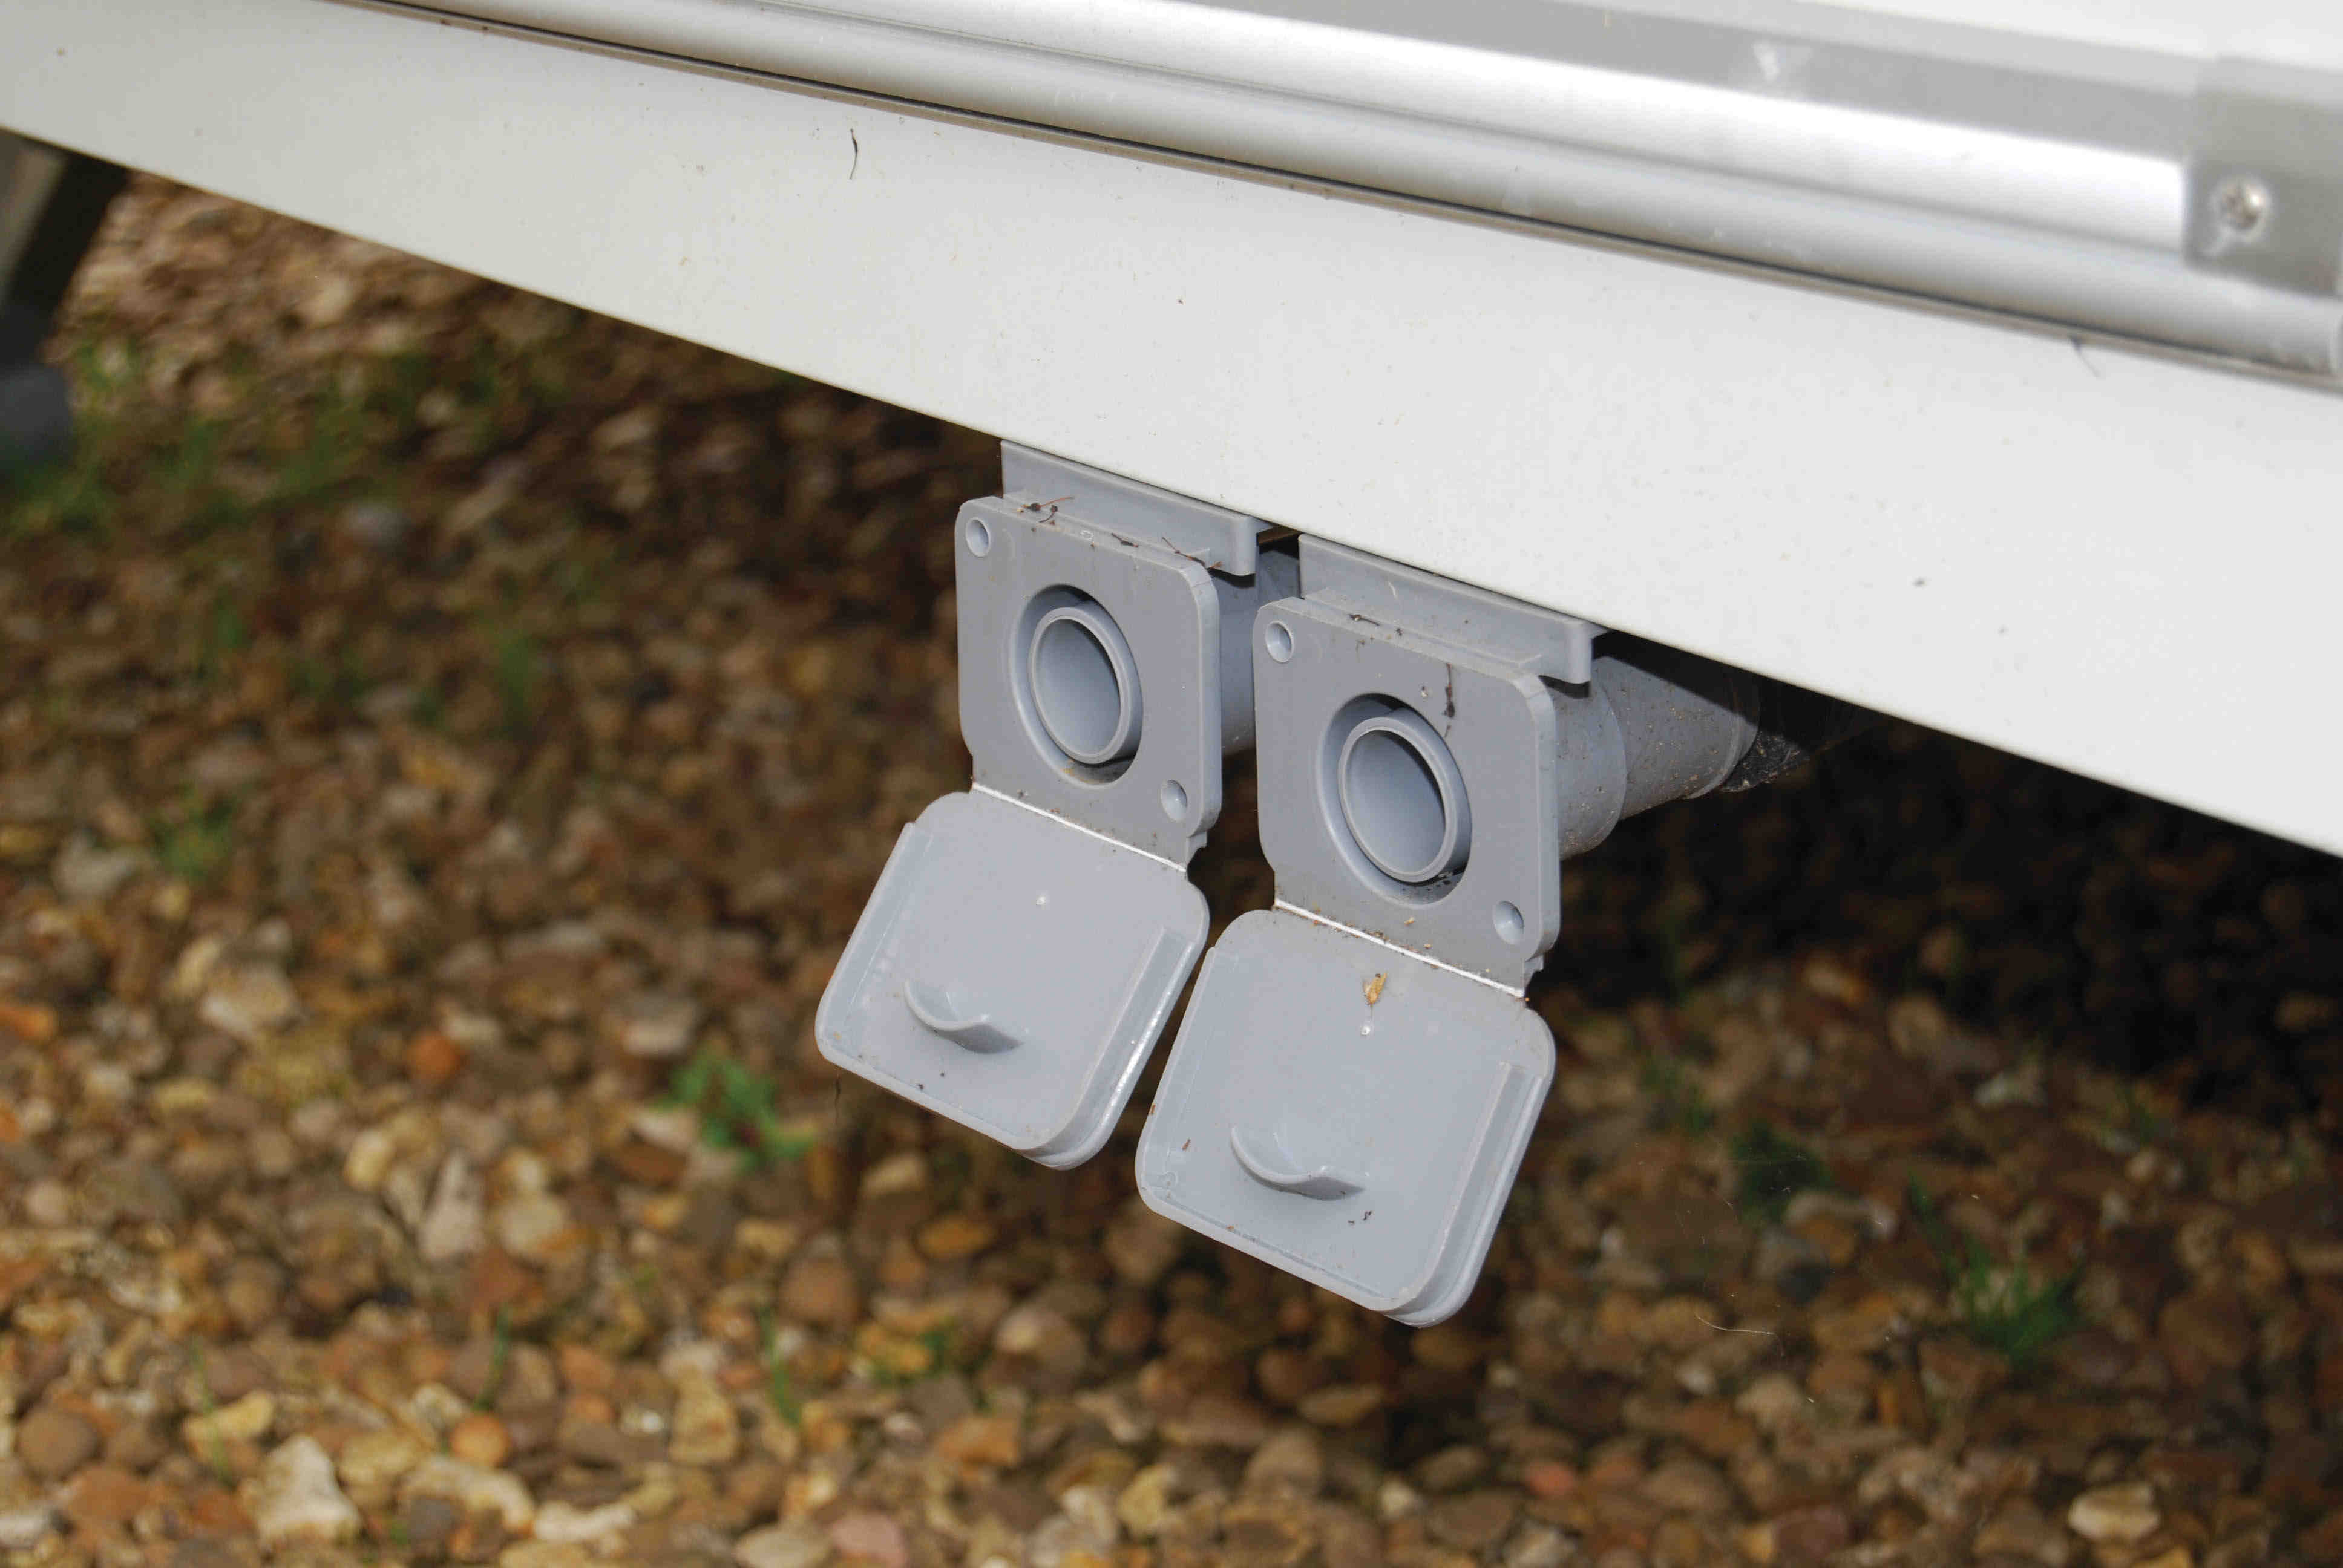 Leave waste outlets open but use stocking-type covers to prevent insects getting in